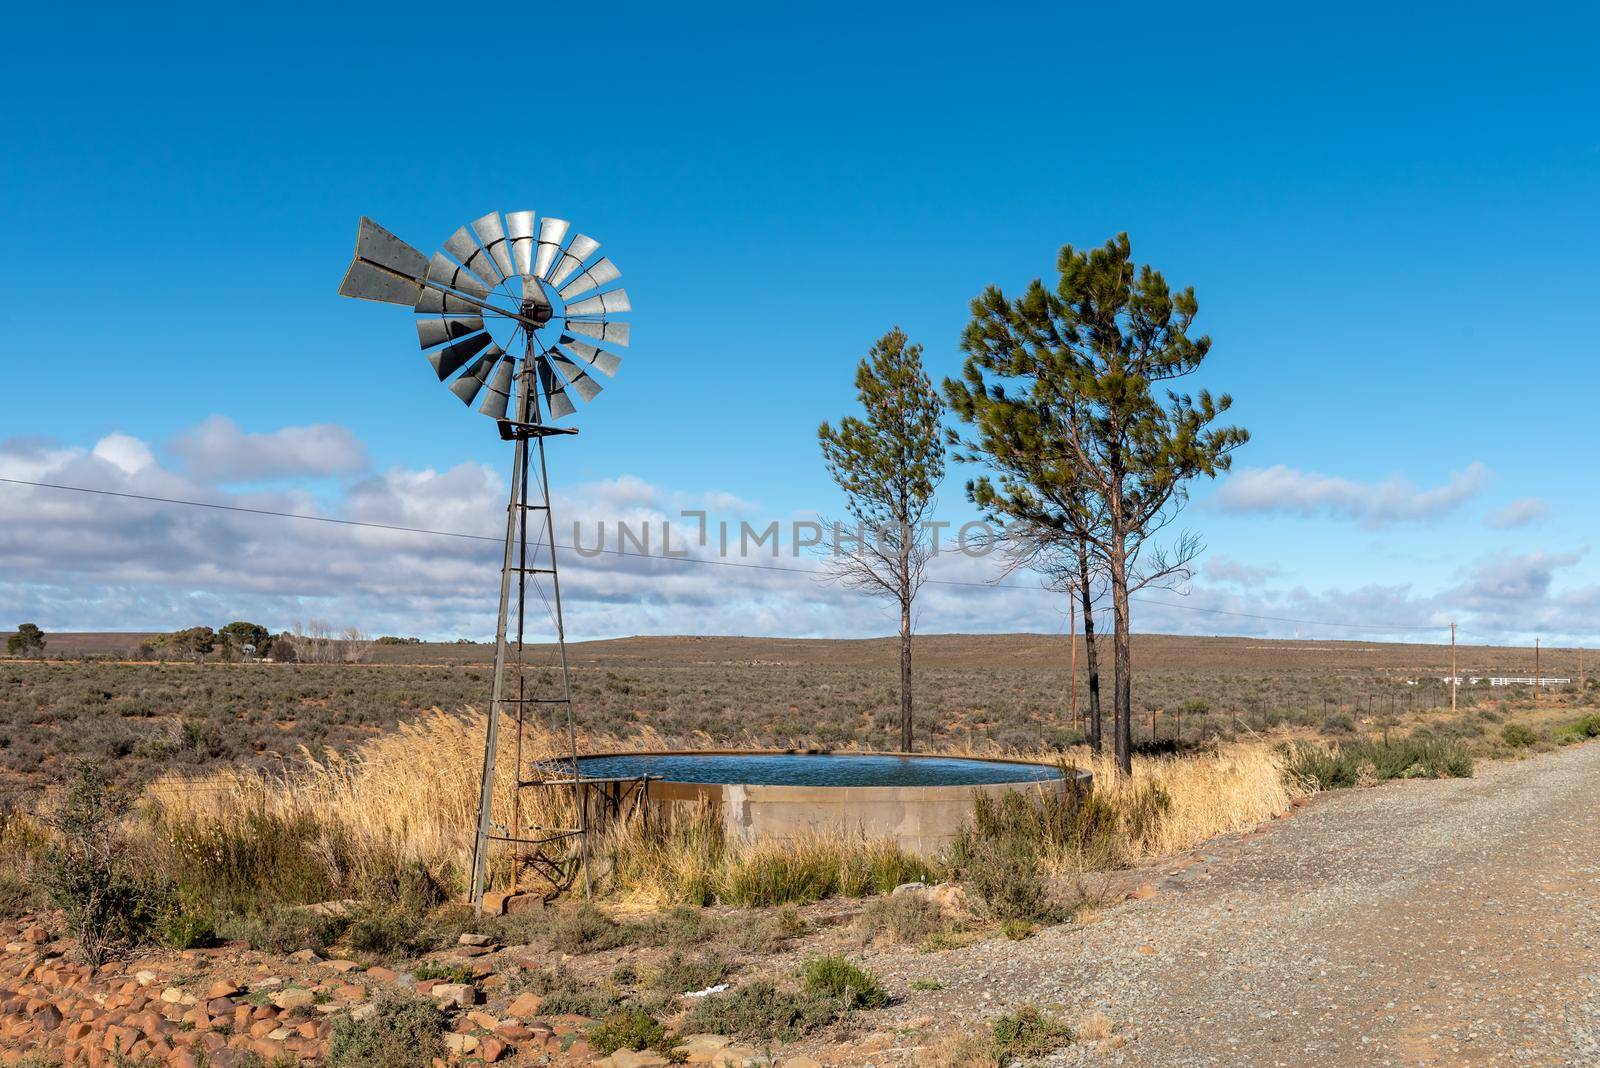 Landscape on road R63 between Victoria West and Loxton in the Northern Cape Province. A water-pumping windmill, trees and a dam are visible